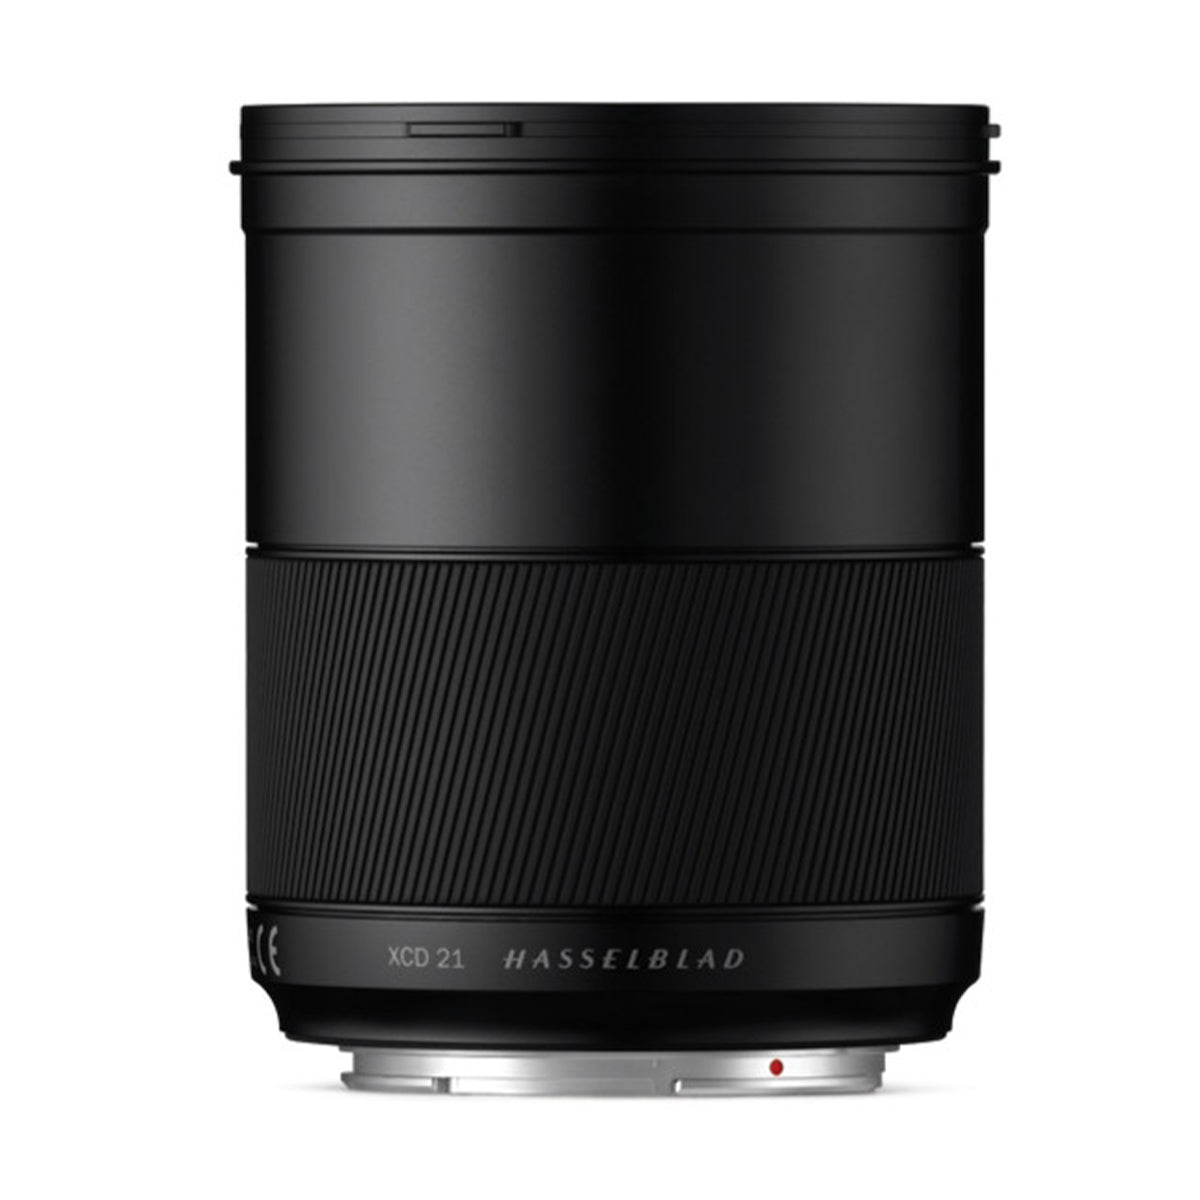 Hasselblad XCD 21mm f4 lens